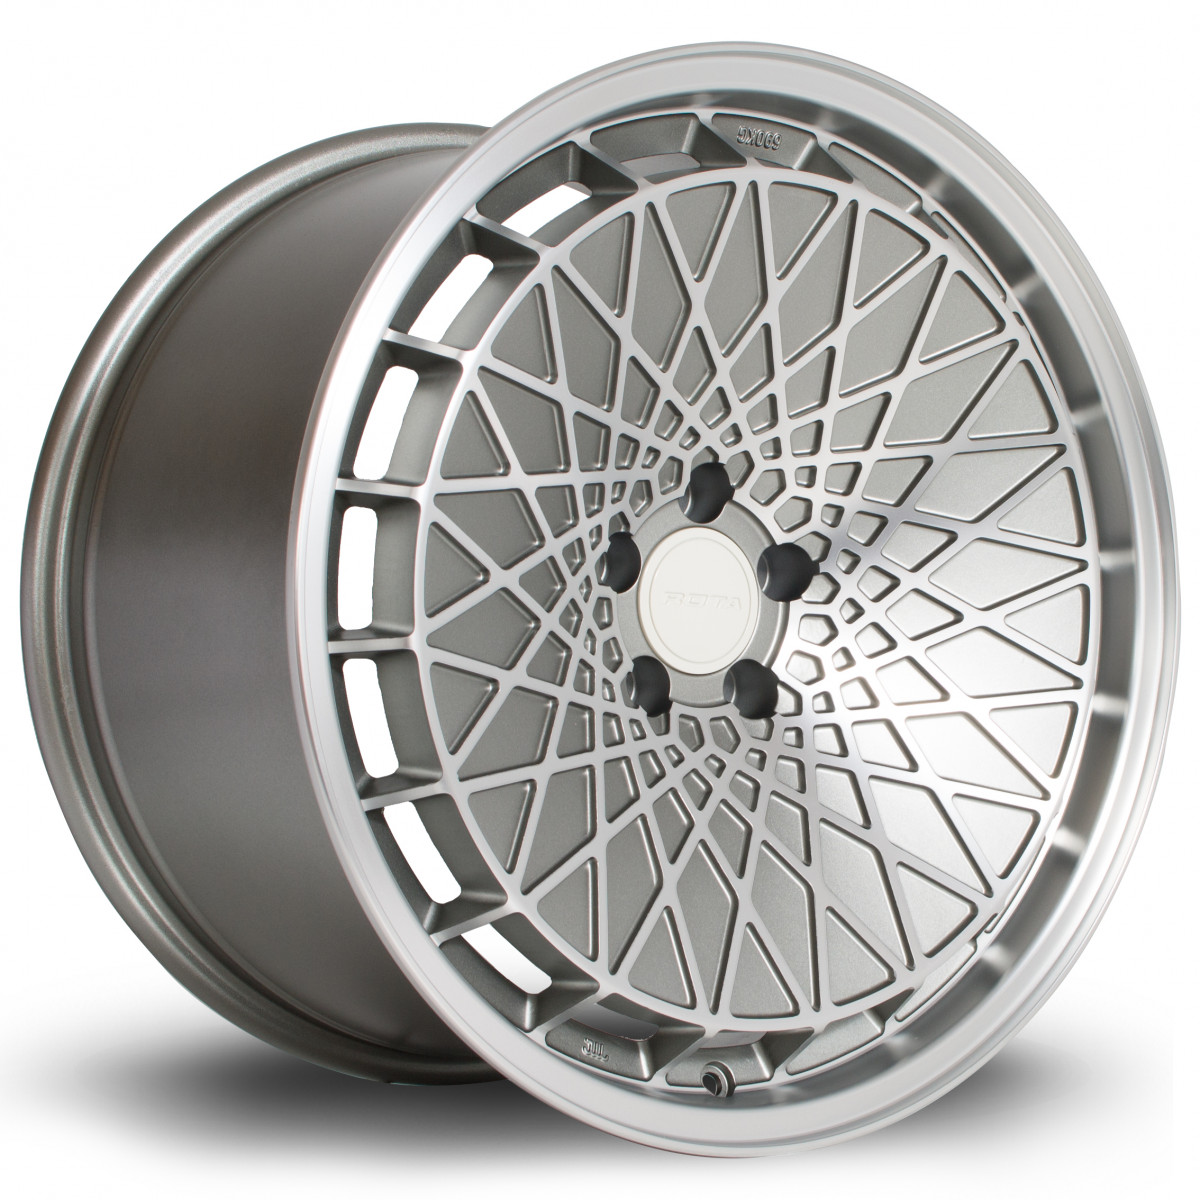 RM100 18x9.5 5x100 ET23 Steelgrey with Matte Polished Face